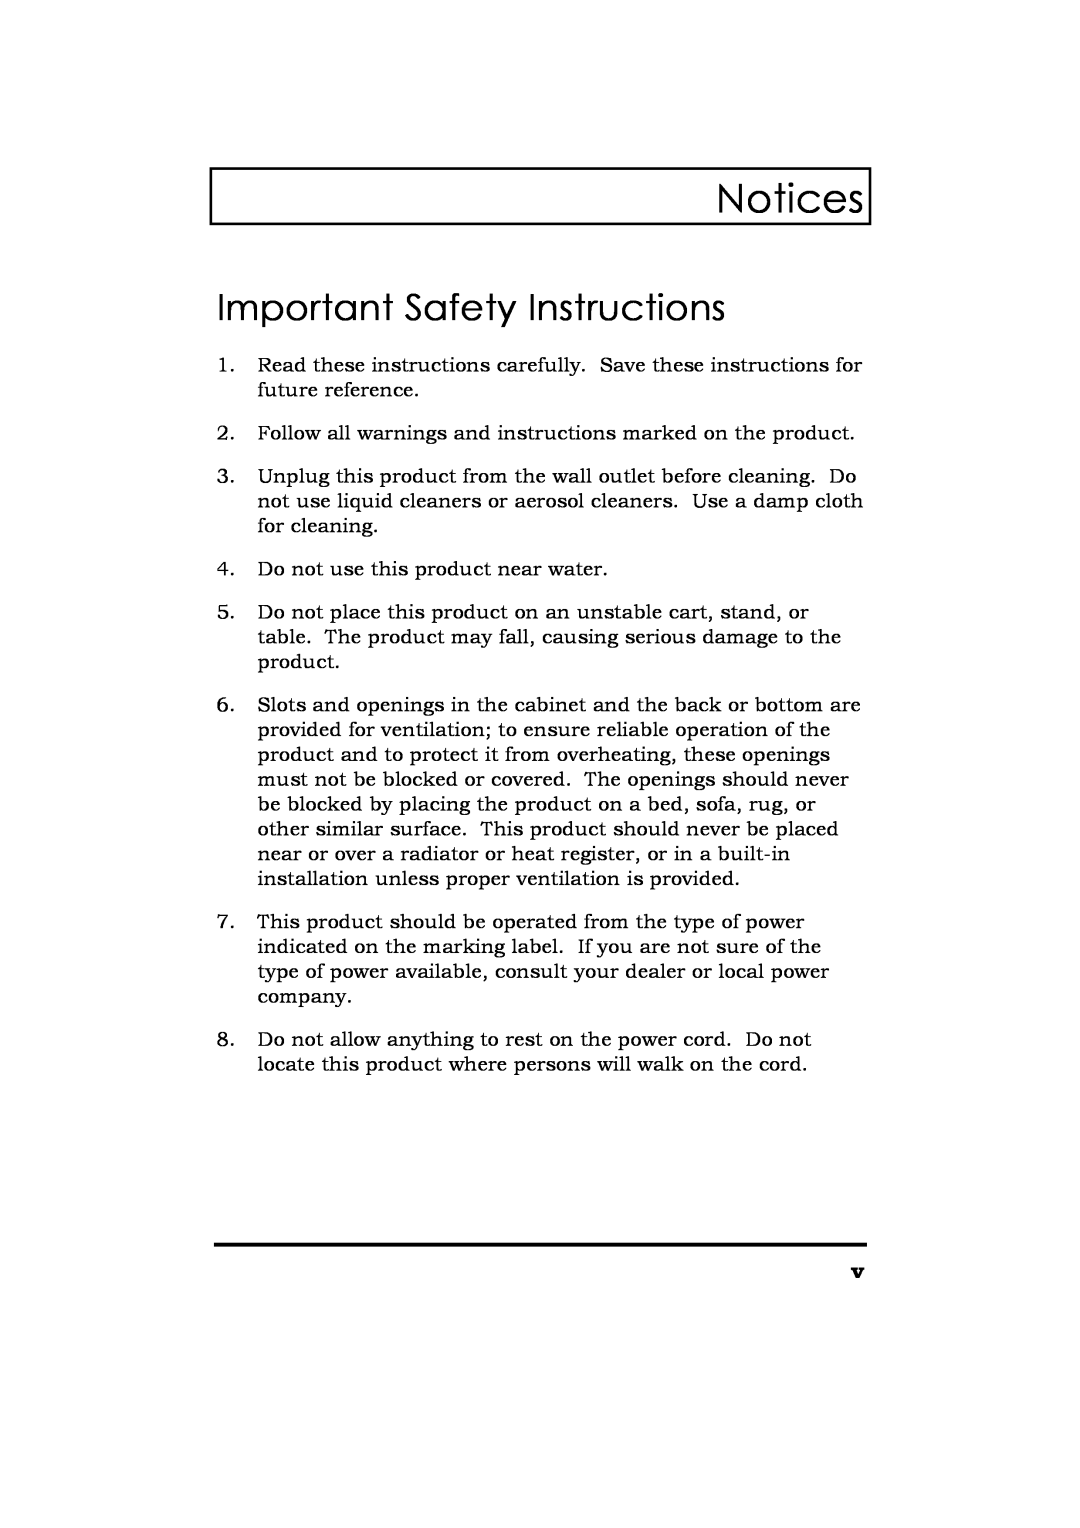 Acer Extensa 365 manual Important Safety Instructions, Notices 